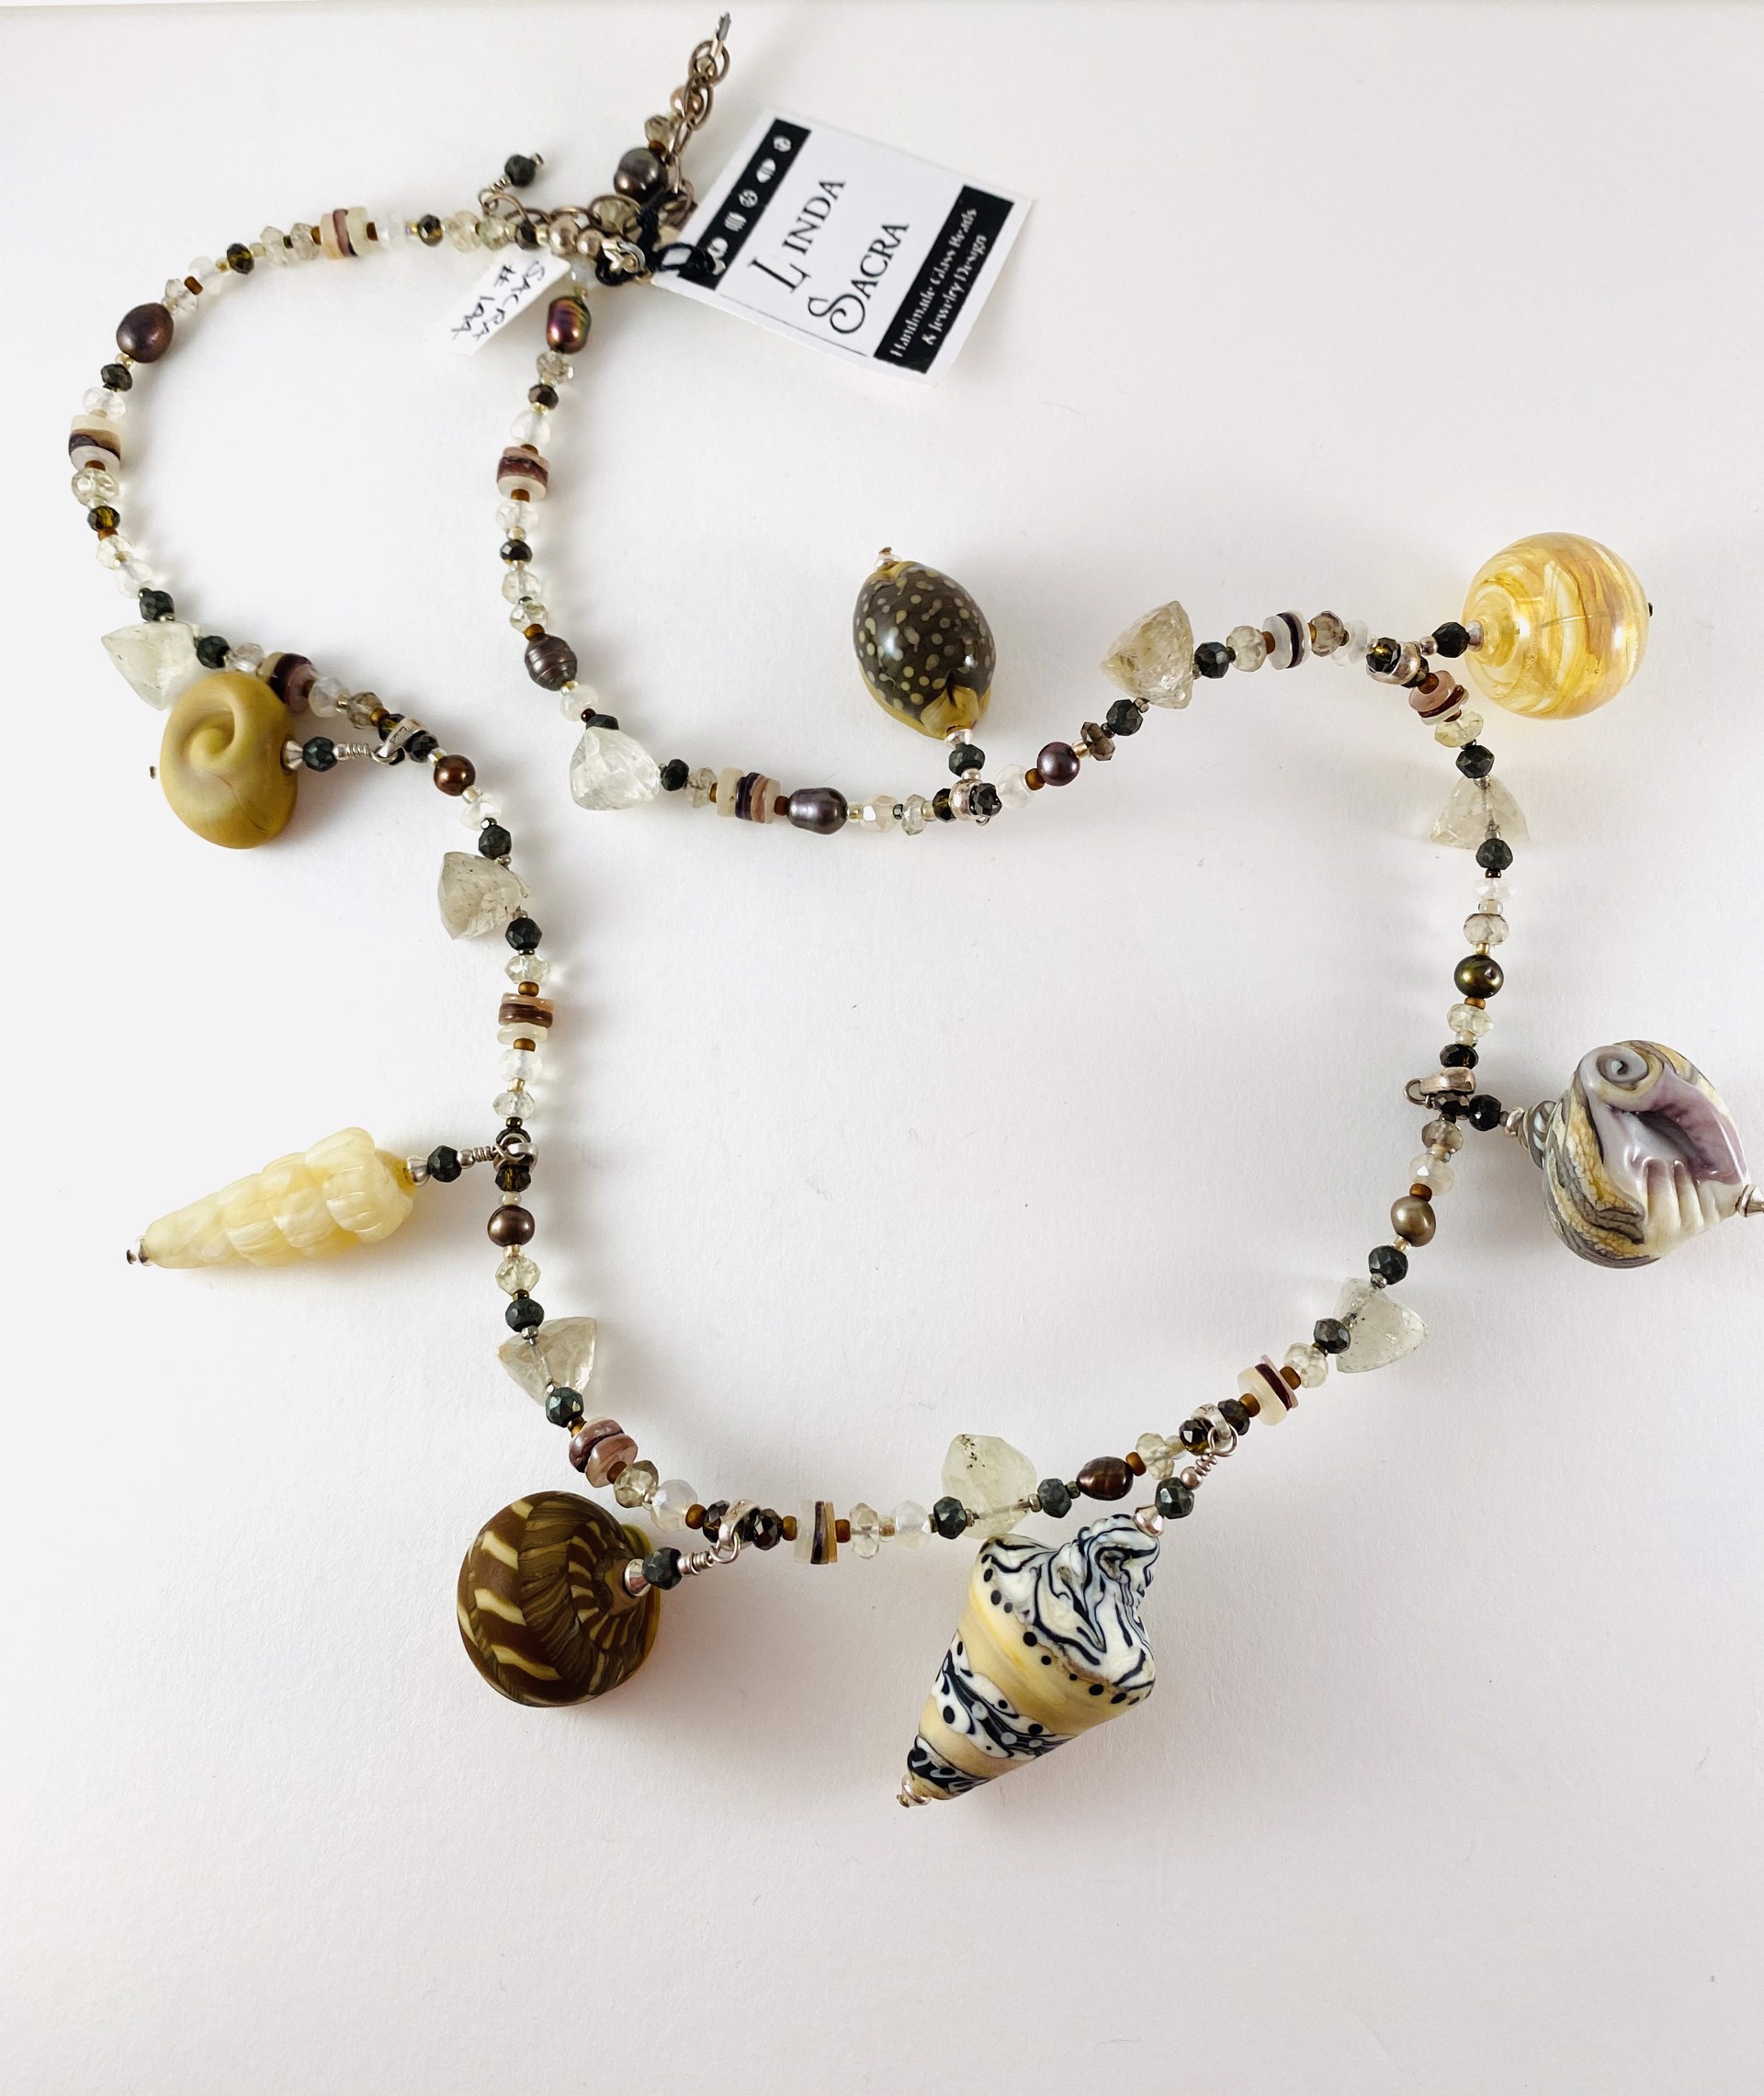 #144 Shells and Beads on Pearl, Gemstone and Rutilated Quartz Trillion Necklace by Linda Sacra